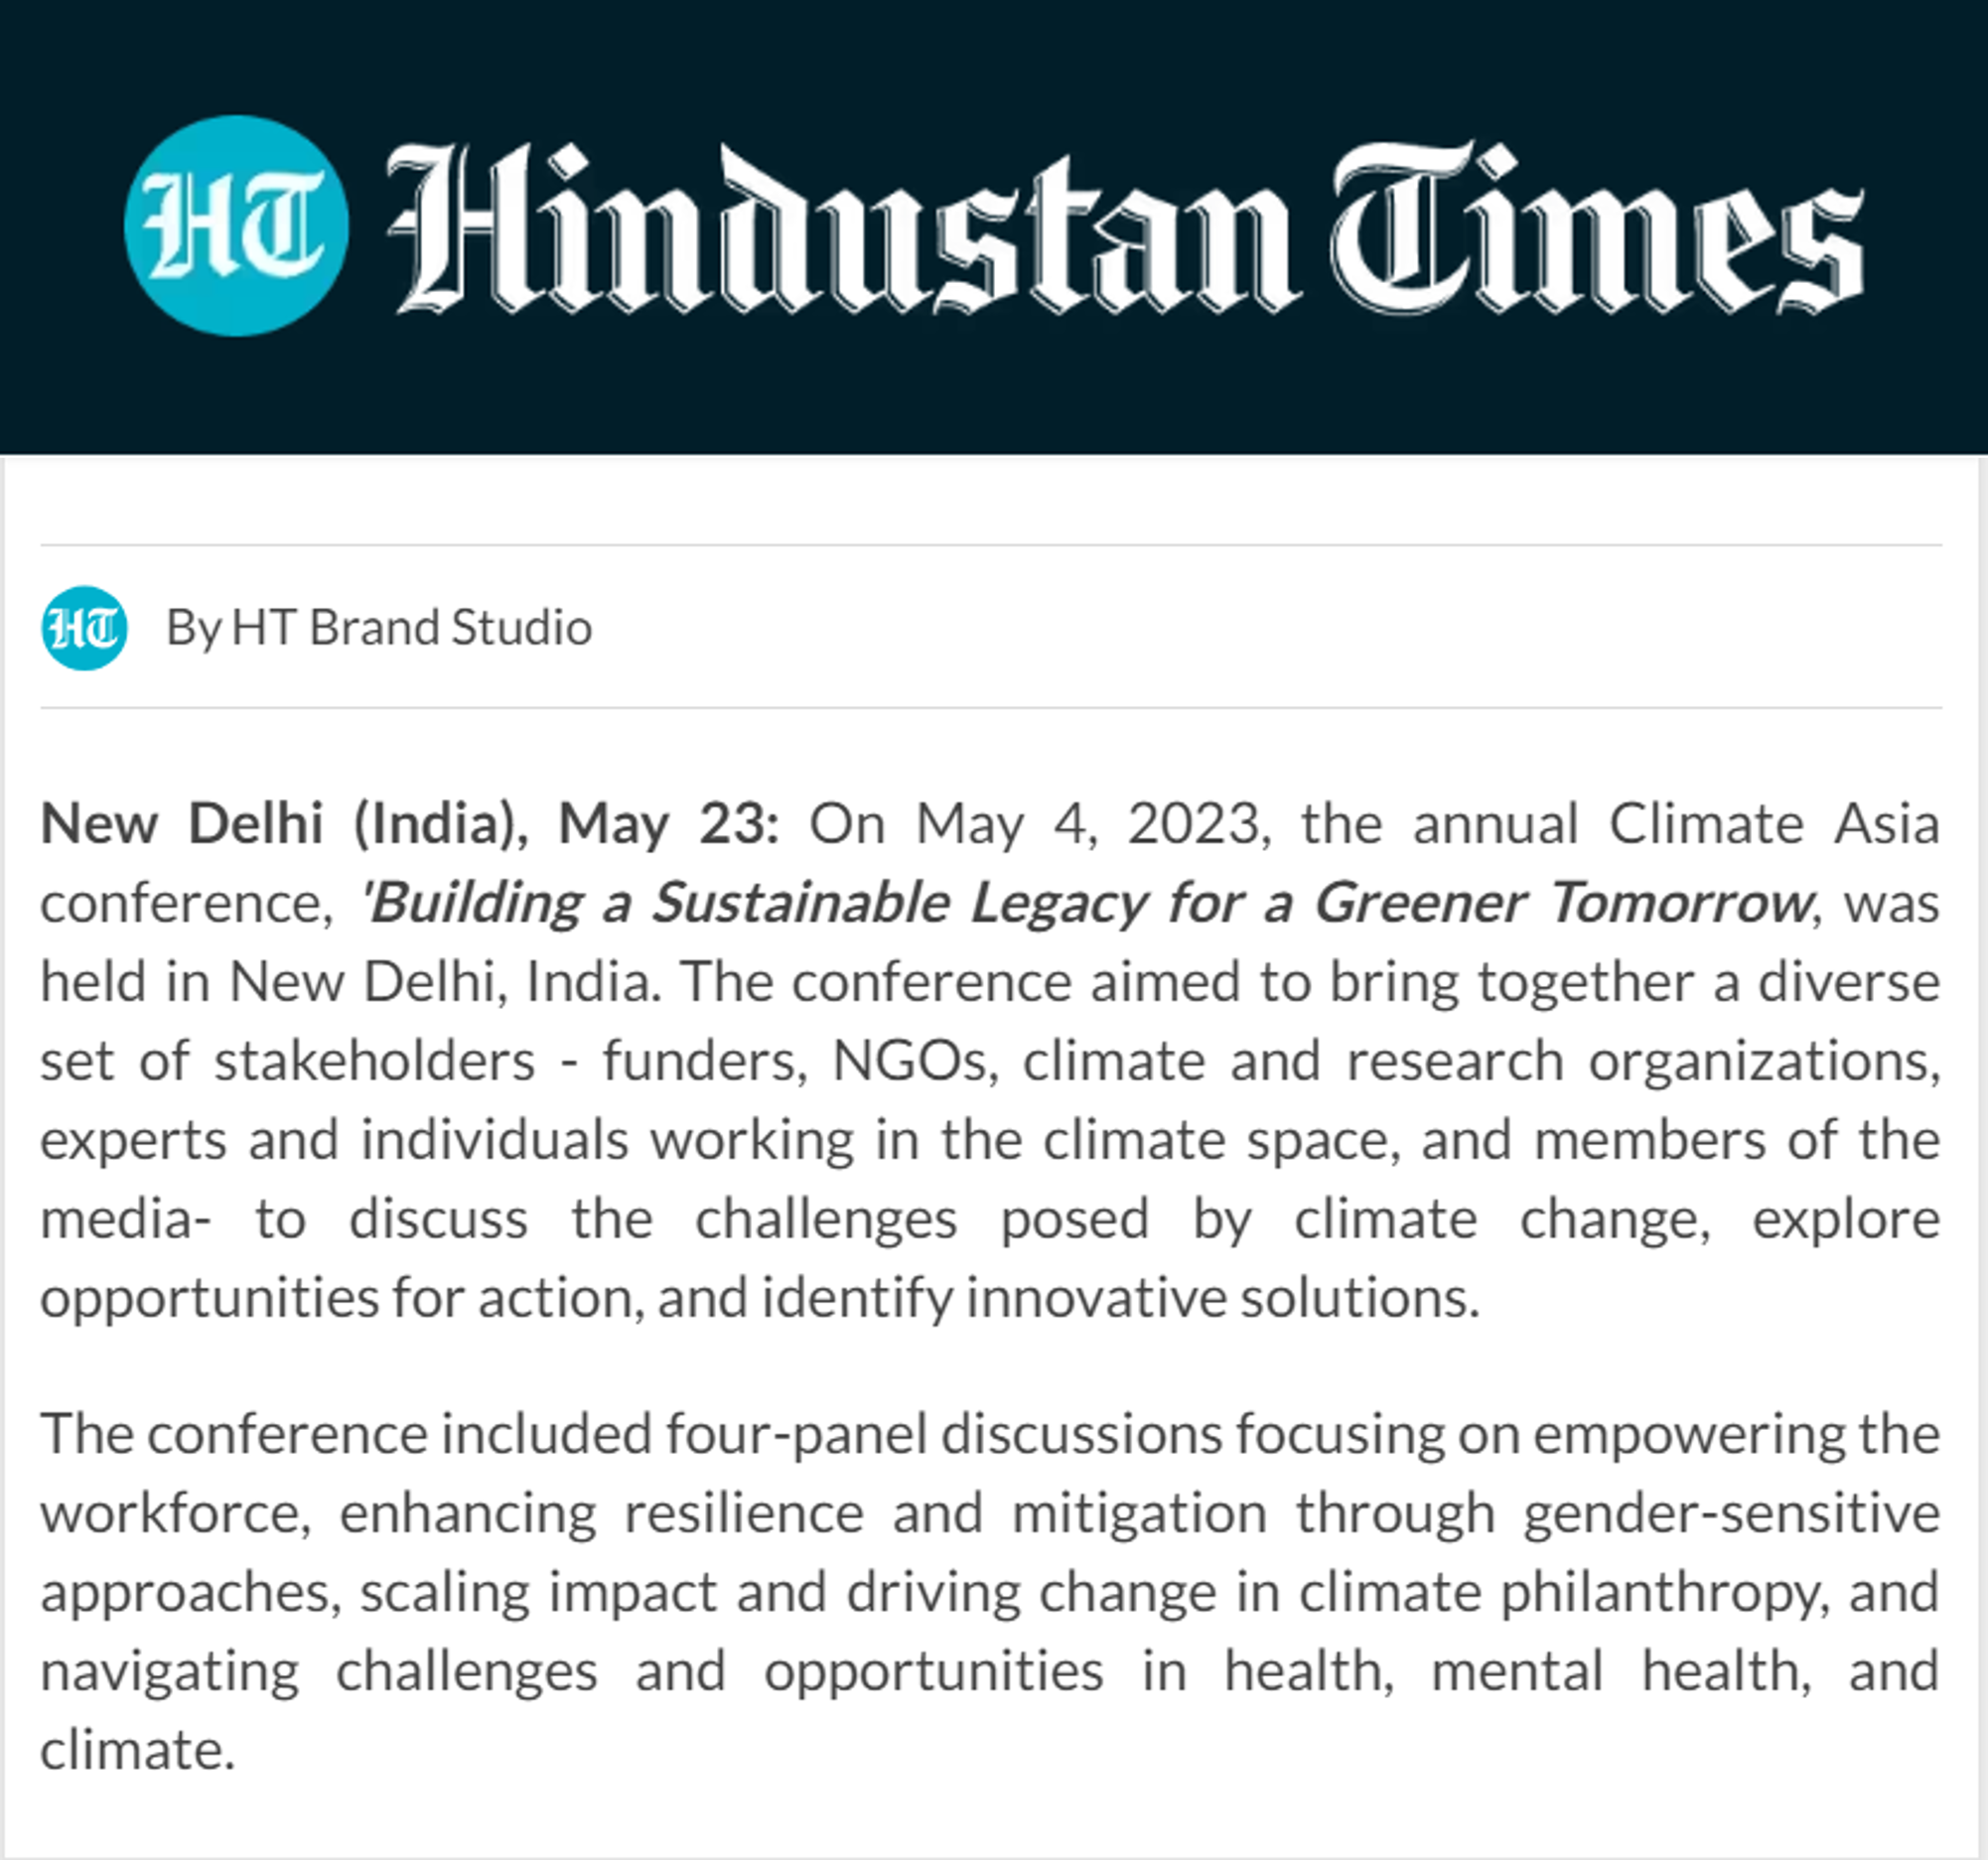 Dr Indu K Murthy mentioned as a speaker at the annual Climate Asia conference by Hindustan Times